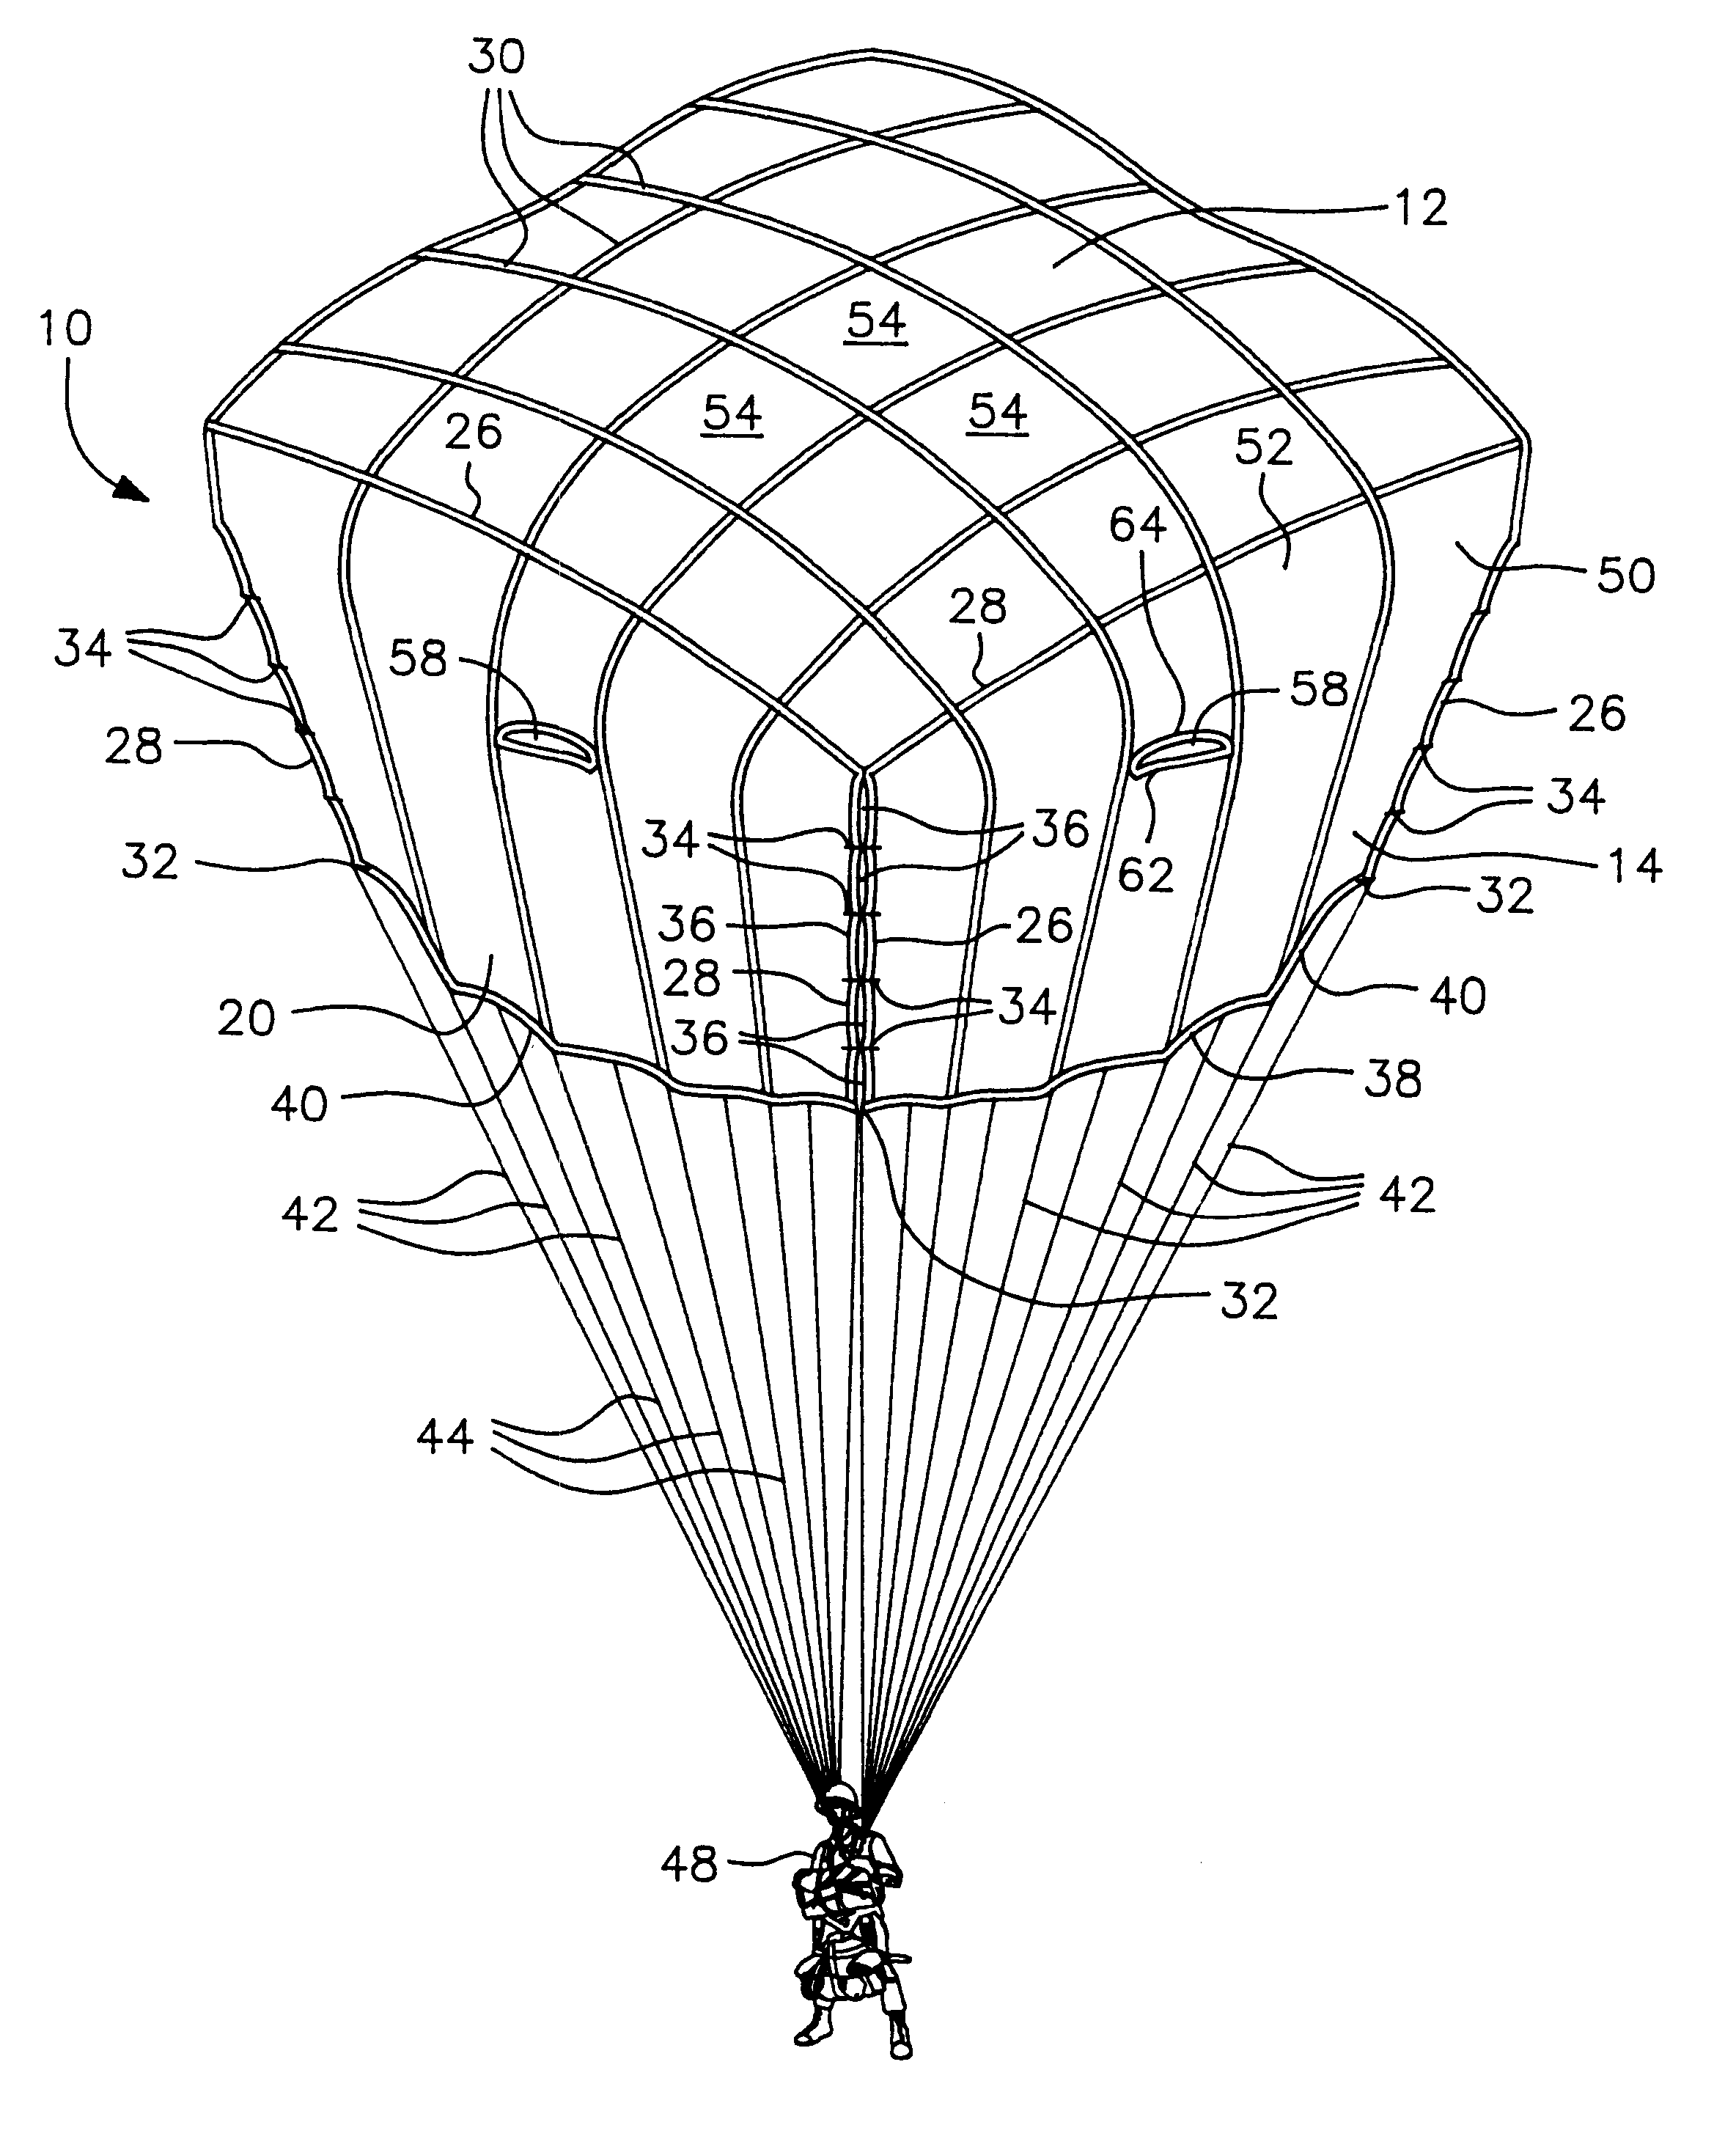 Cruciform parachute with arms attached